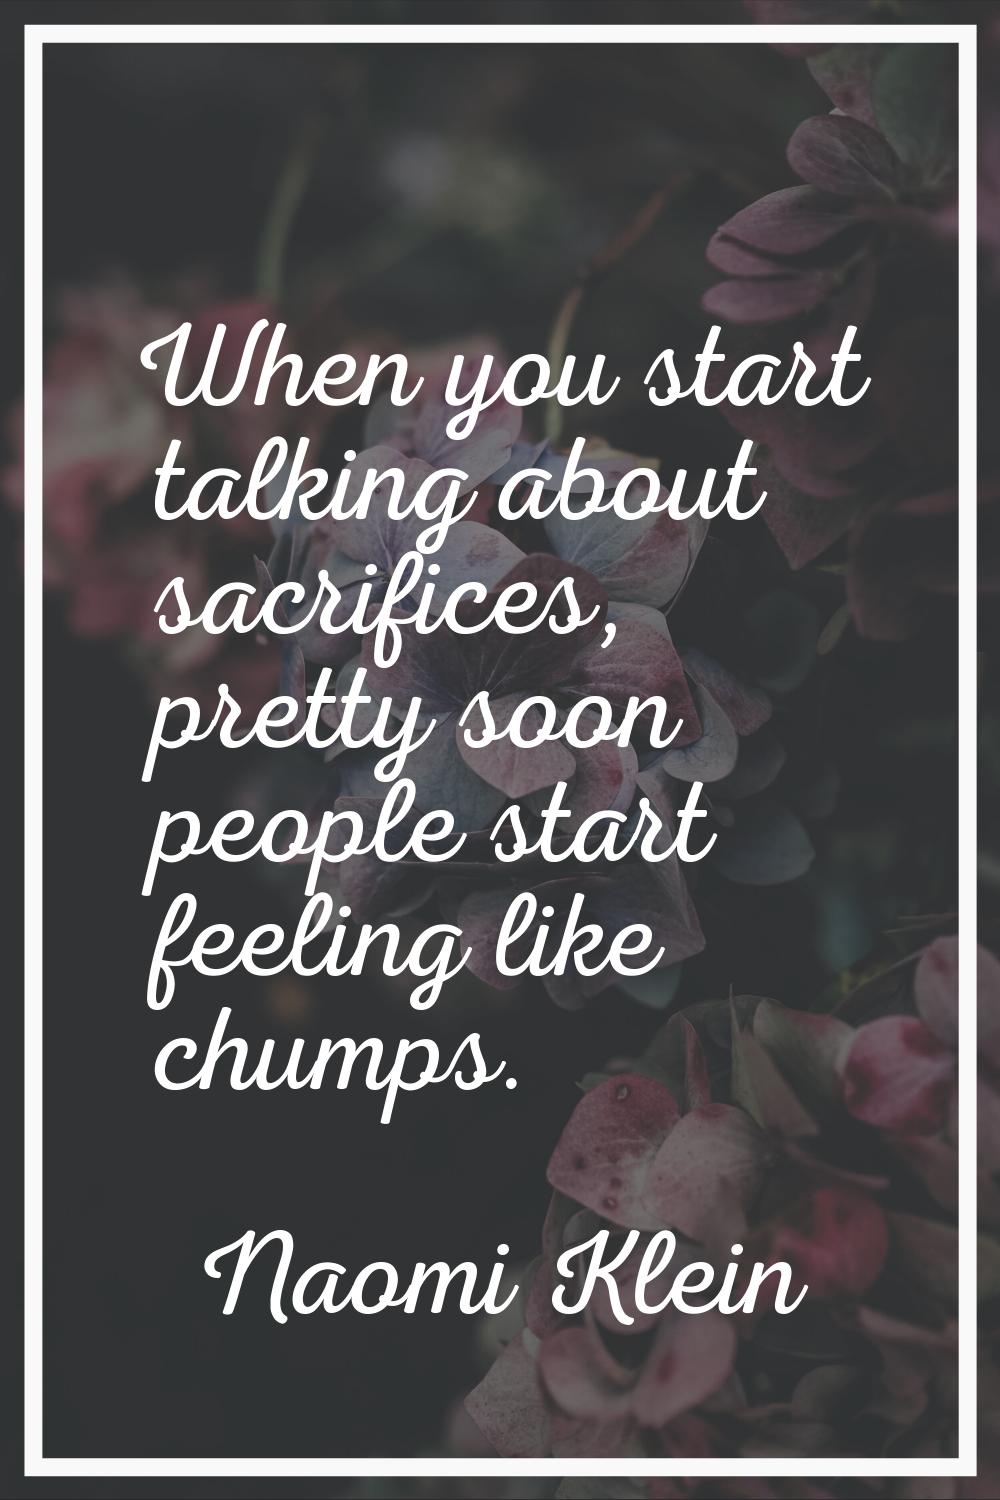 When you start talking about sacrifices, pretty soon people start feeling like chumps.